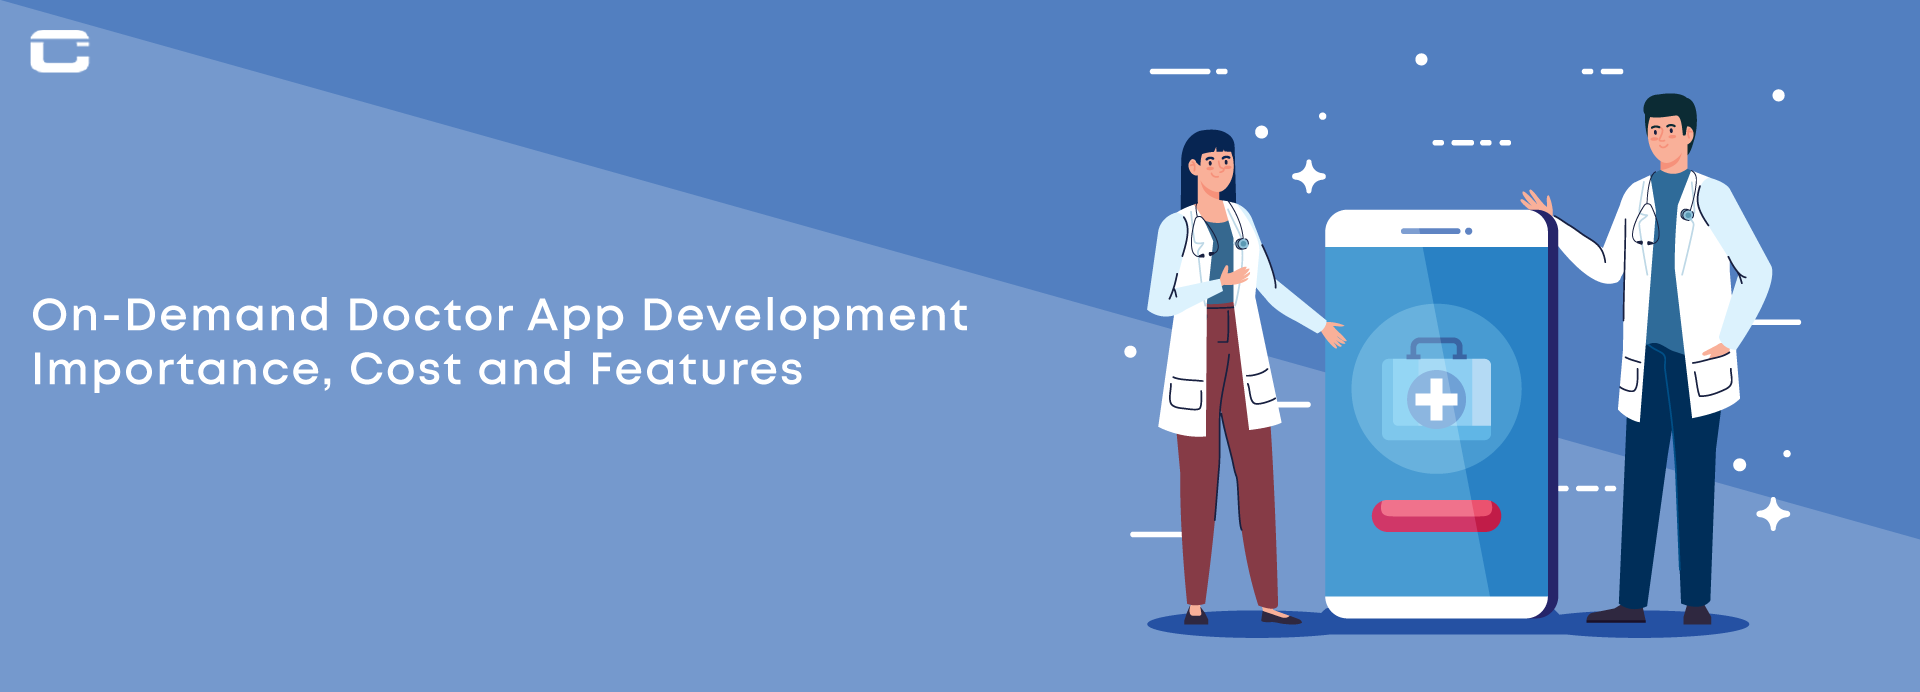 On-Demand Doctor App Development Importance, Cost and, Features